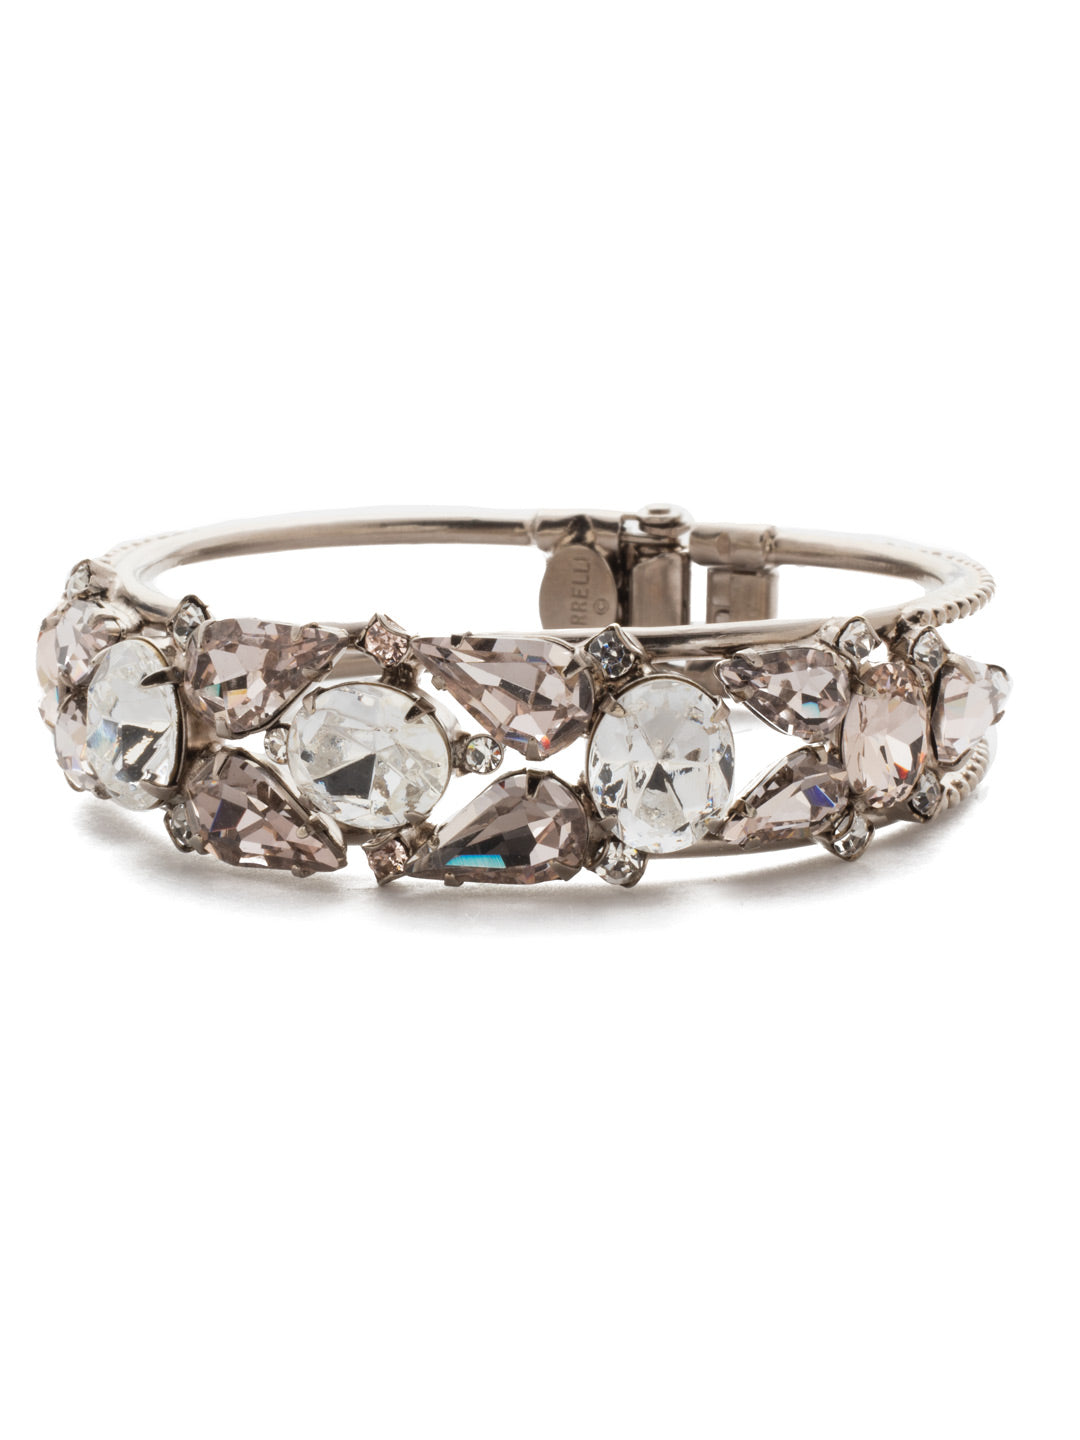 Crystal Cluster Hinge Cuff - BCP5ASPLS - <p>Trois, deux, un... fabulous! With gorgeous crystals and vintage accents on a hinge, this comfortable crystal cuff will keep you sparkling all day no matter which way you twist your wrist. From Sorrelli's Soft Petal collection in our Antique Silver-tone finish.</p>